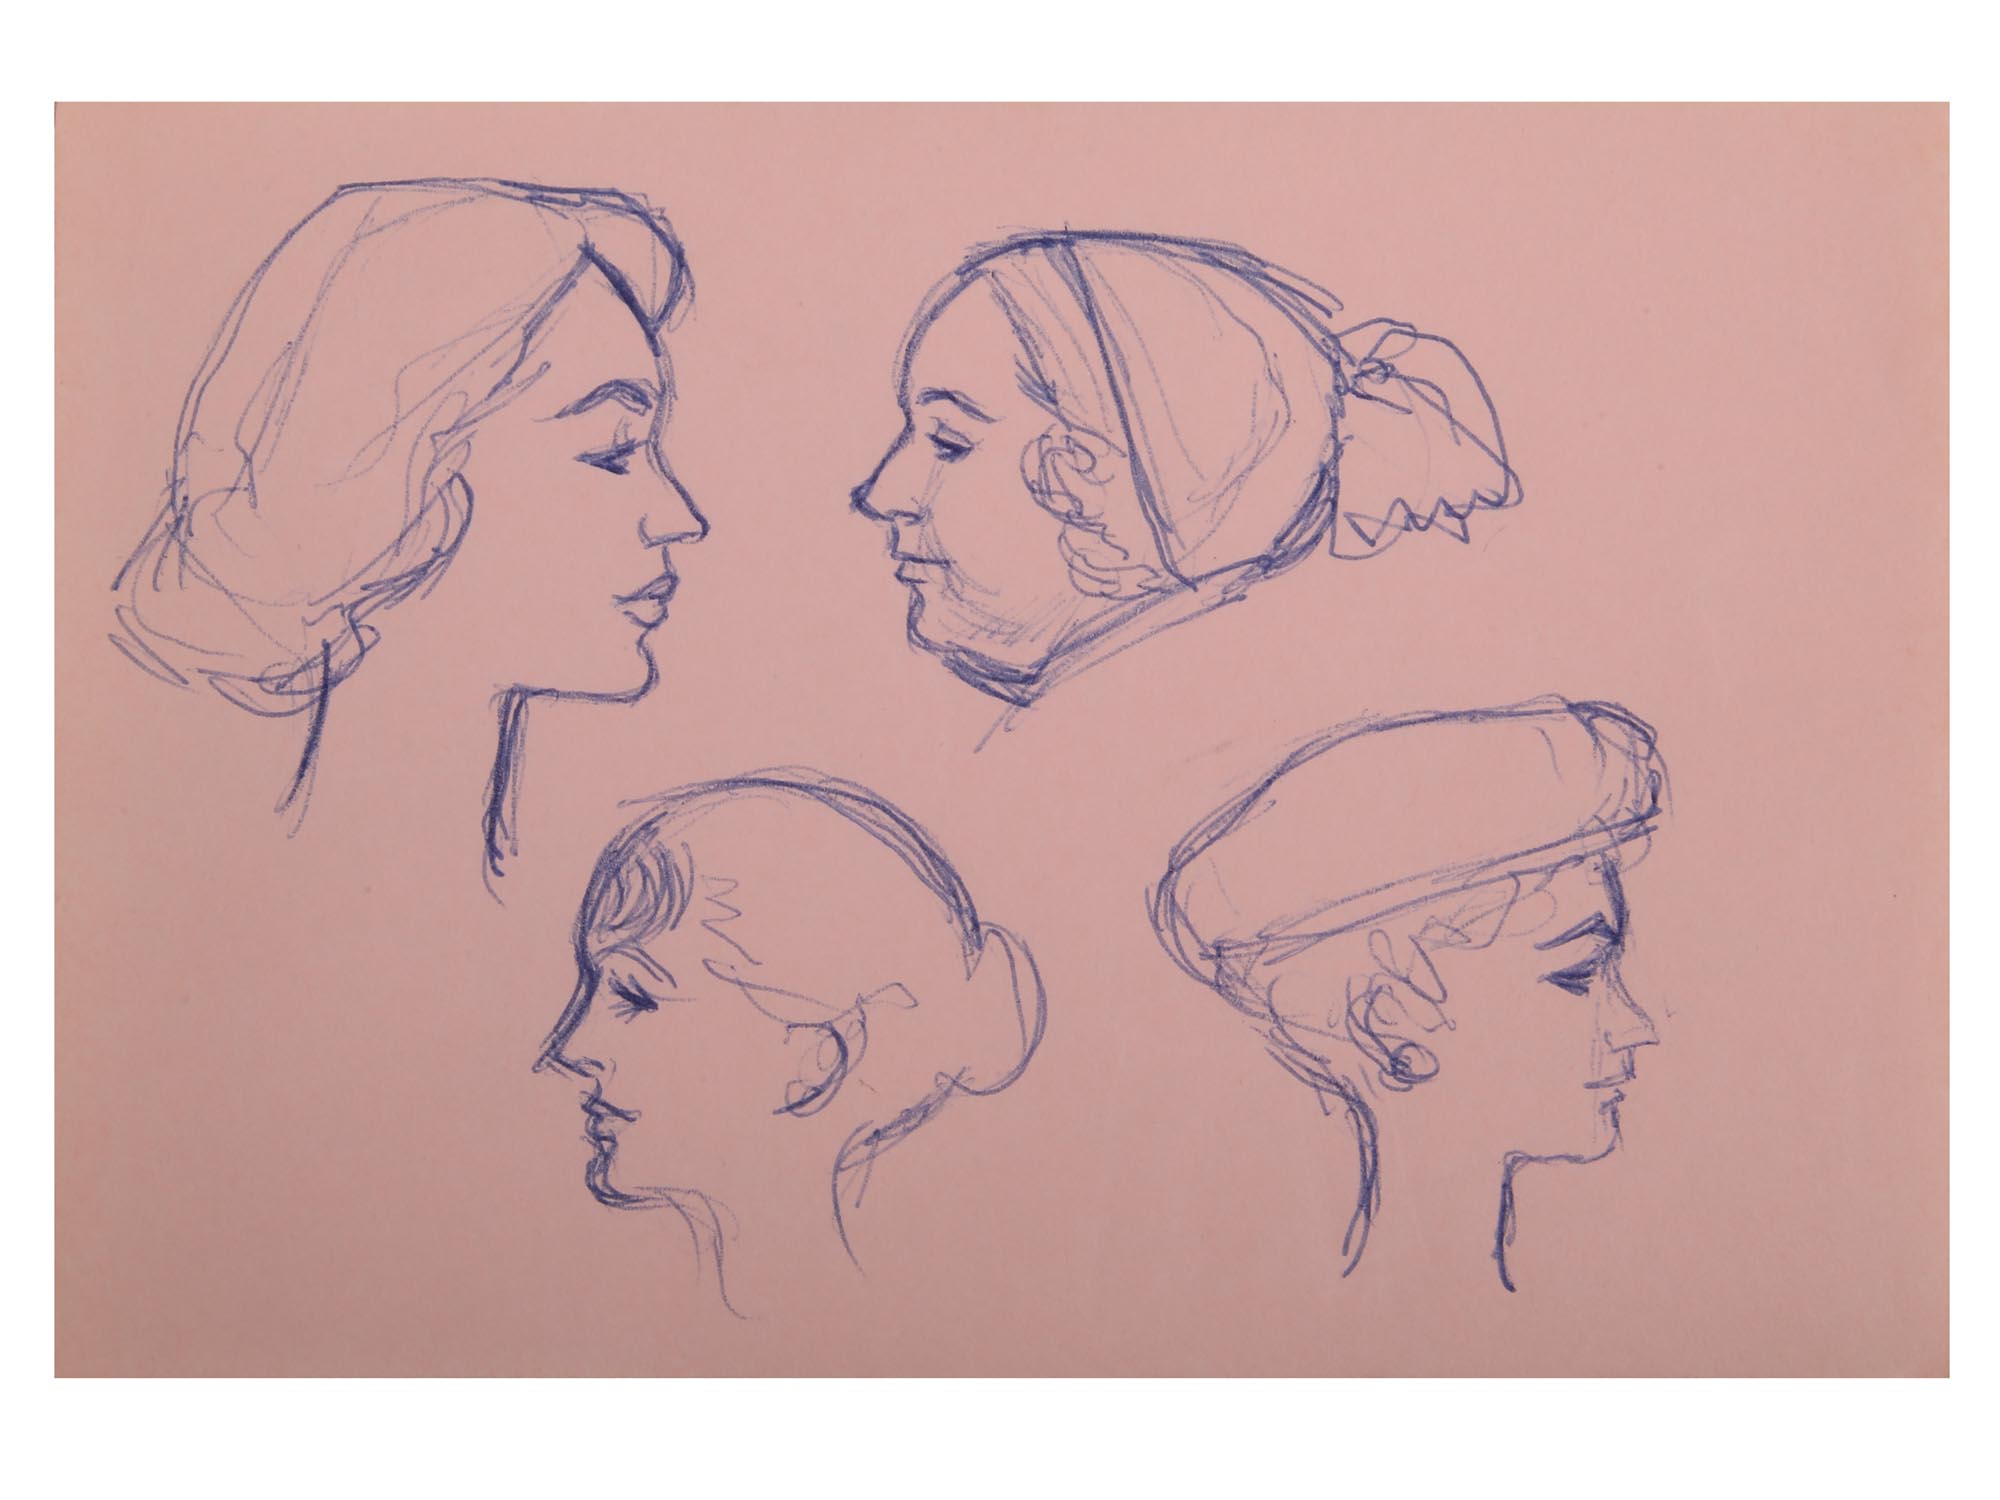 AMERICAN INK PAINTINGS SKETCHES BY BILL FRACCIO PIC-3